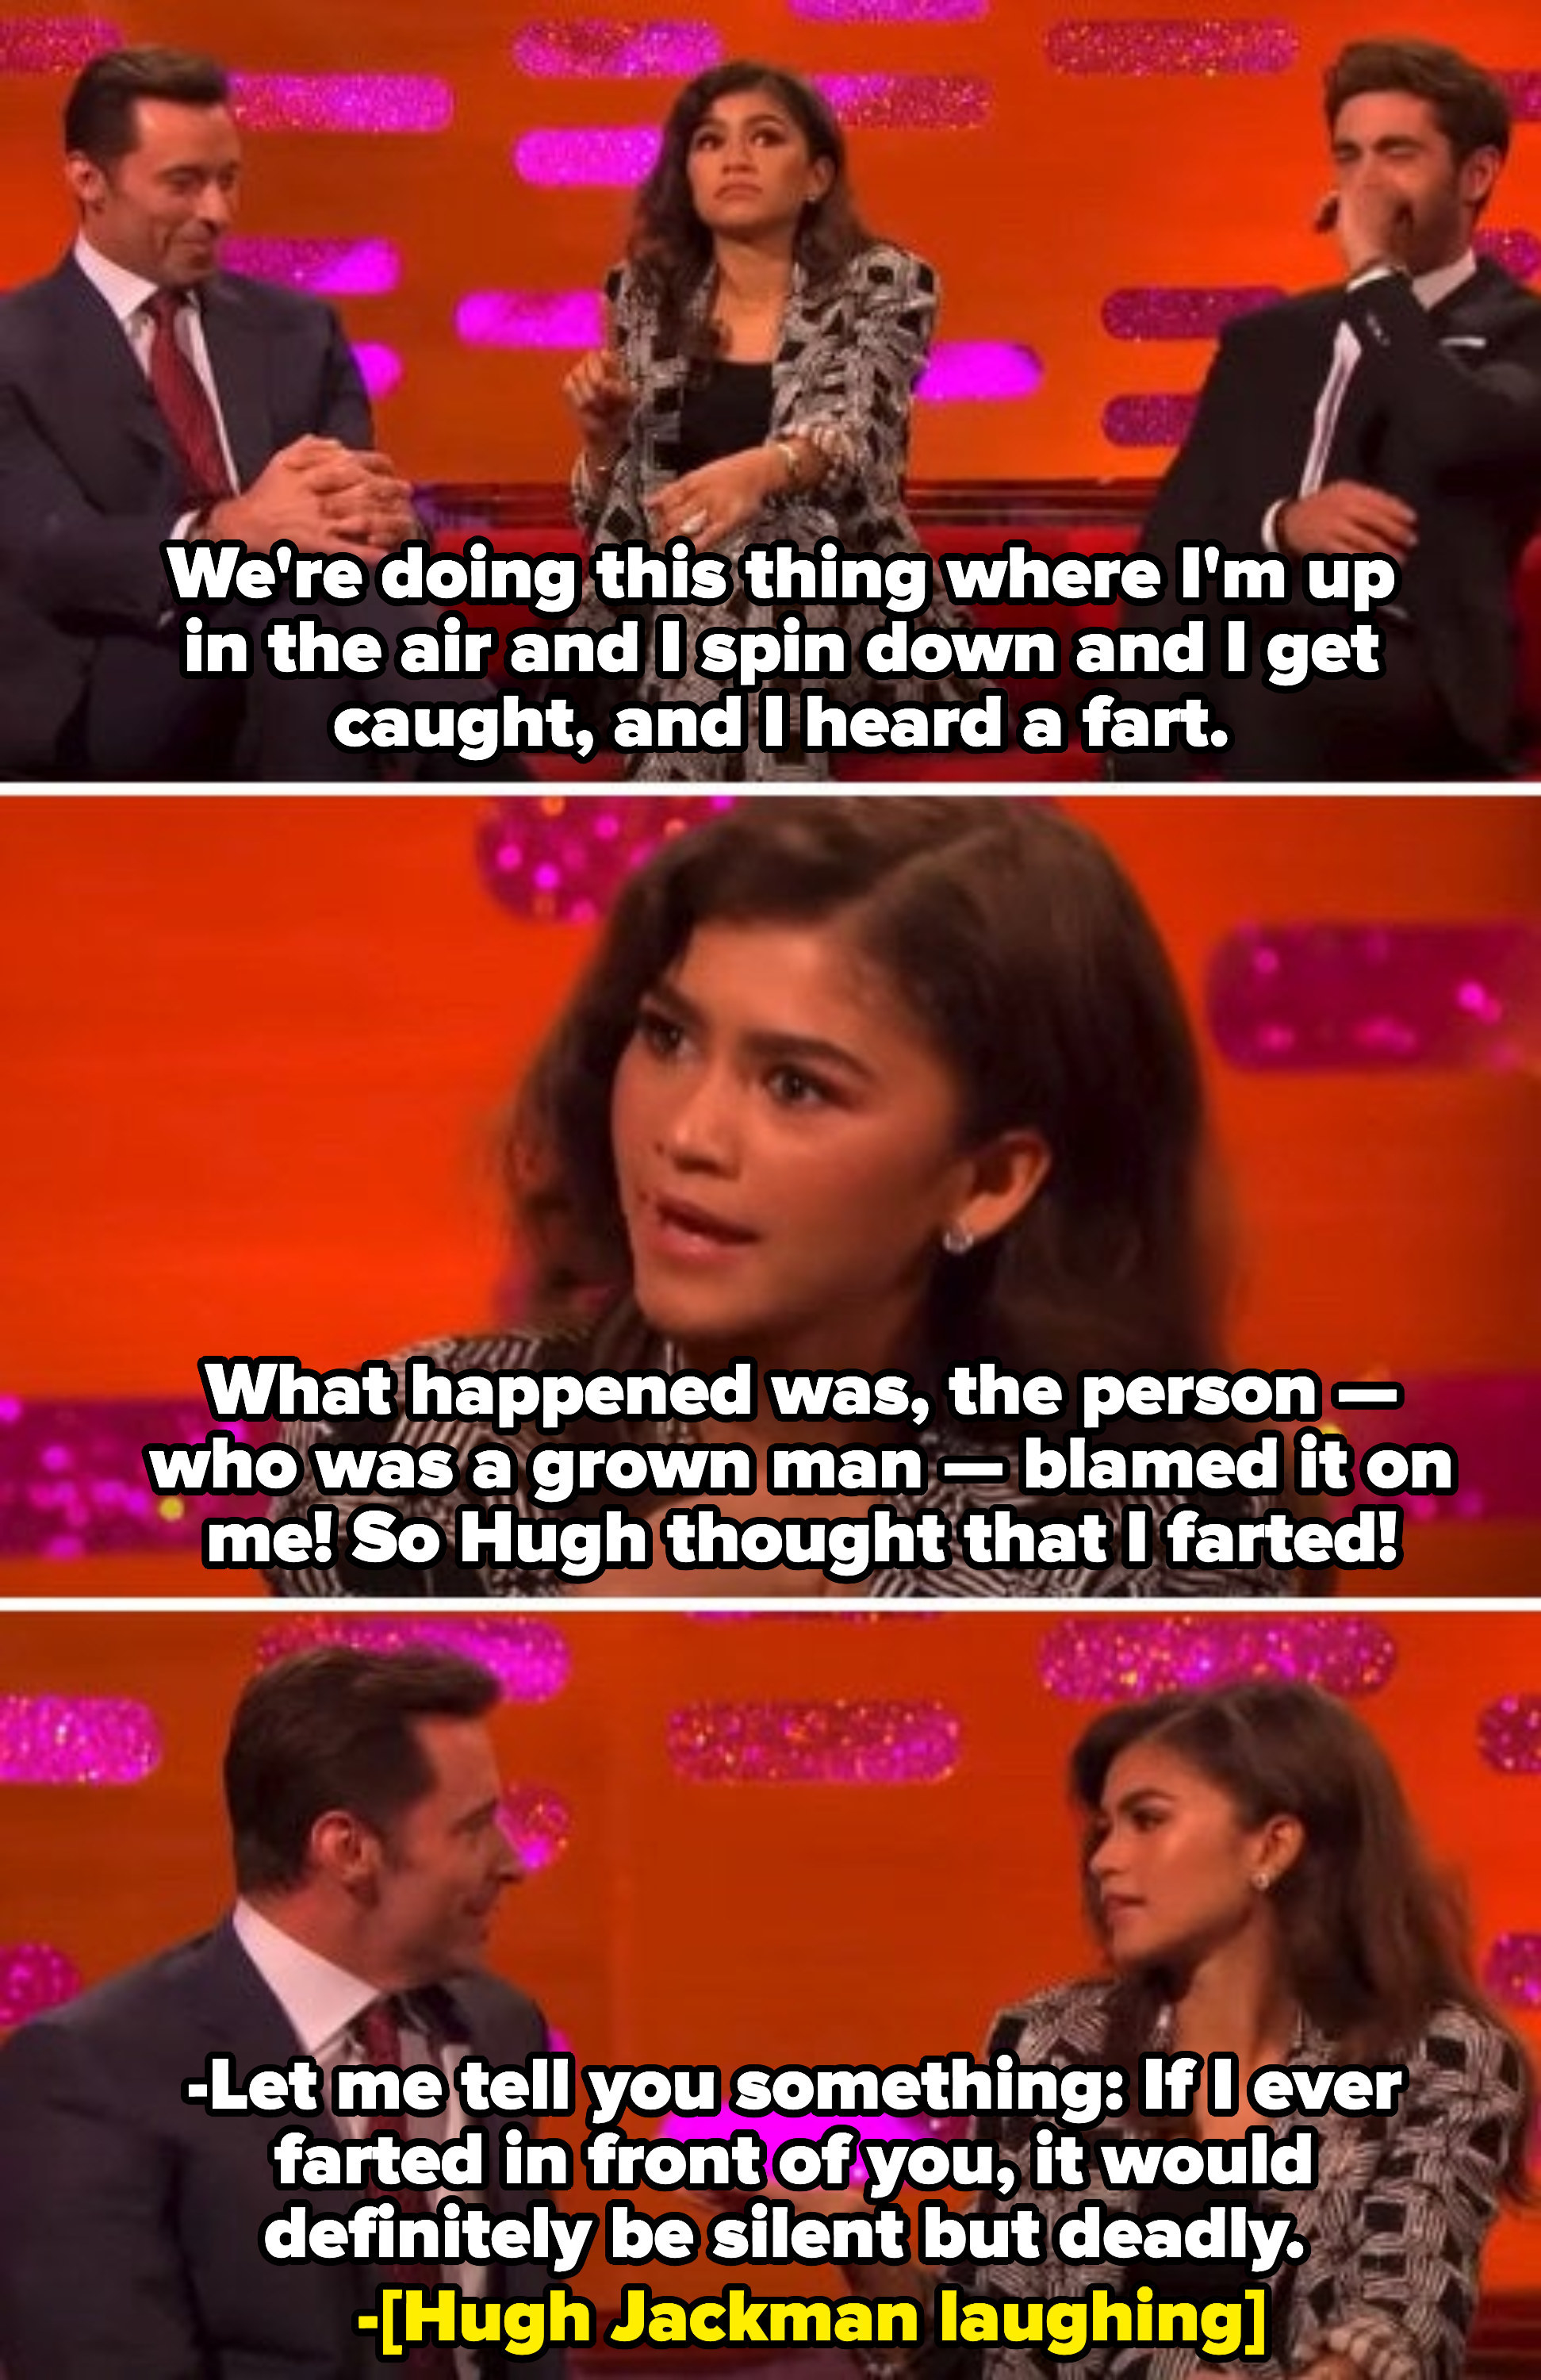 Zendaya: &quot;The person — who was a grown man — blamed it on me! So Hugh thought that I farted!&quot;